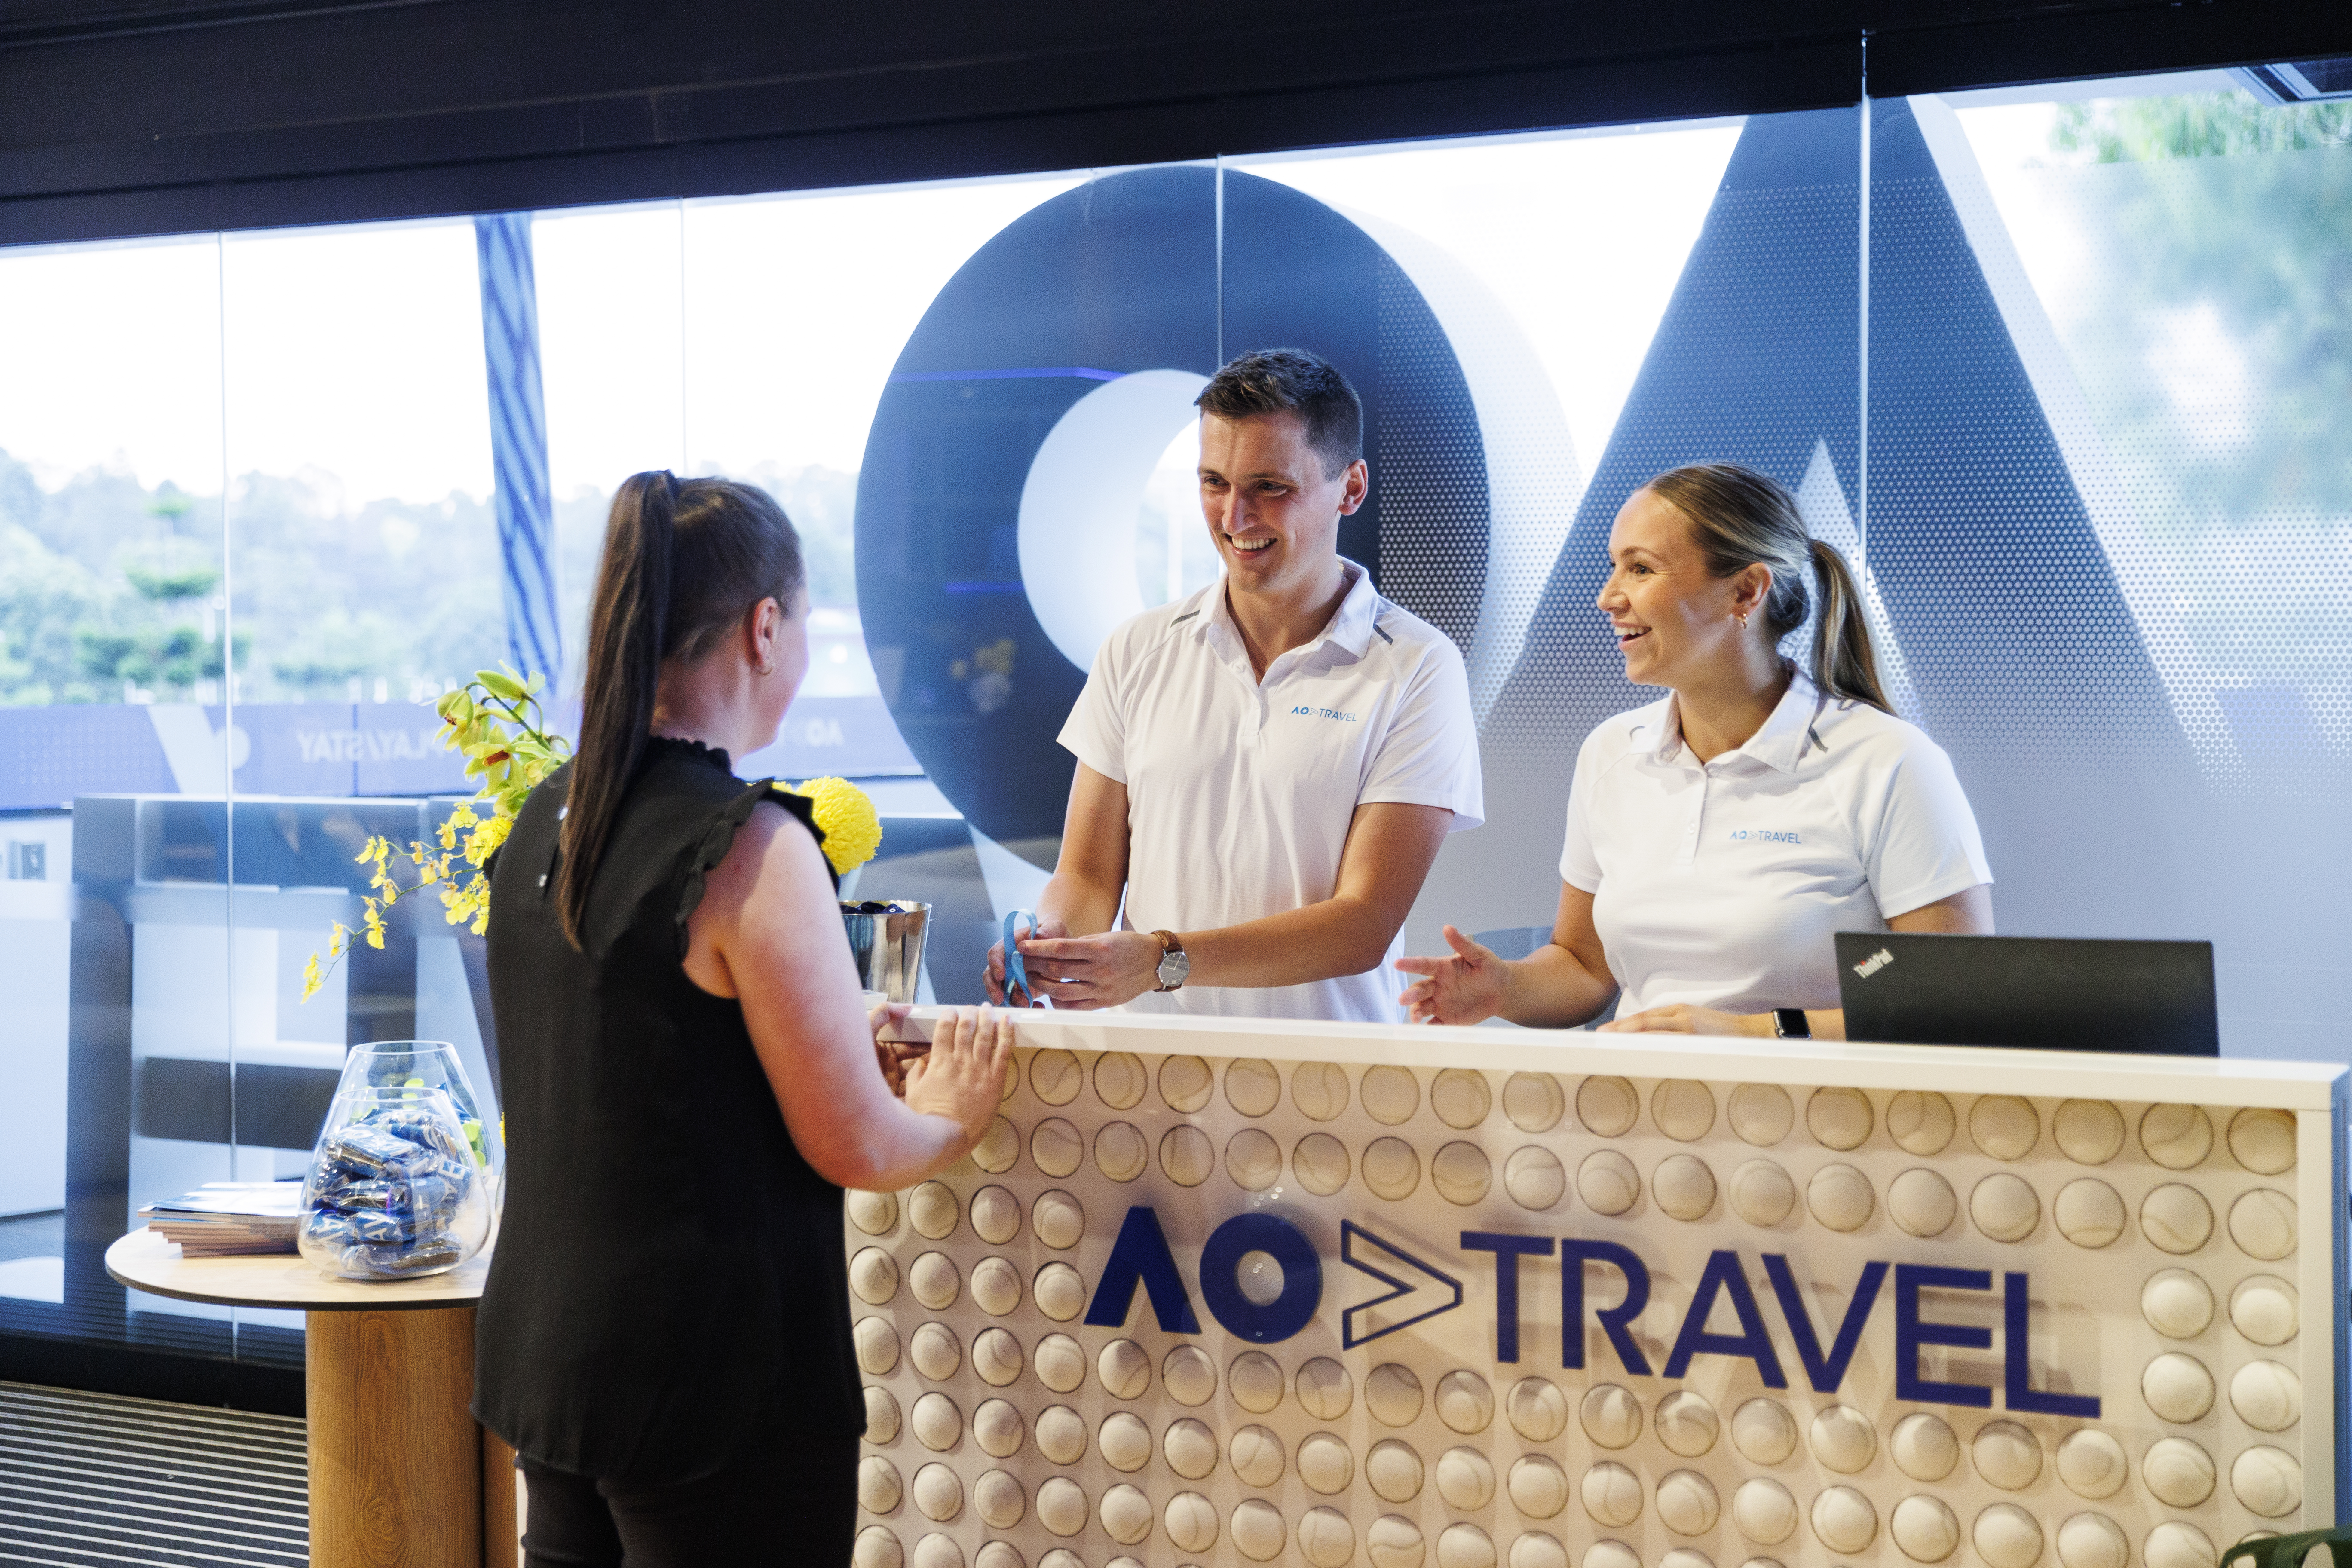 AO Travel staff members interacting with a customer in the AO Travel Lounge.